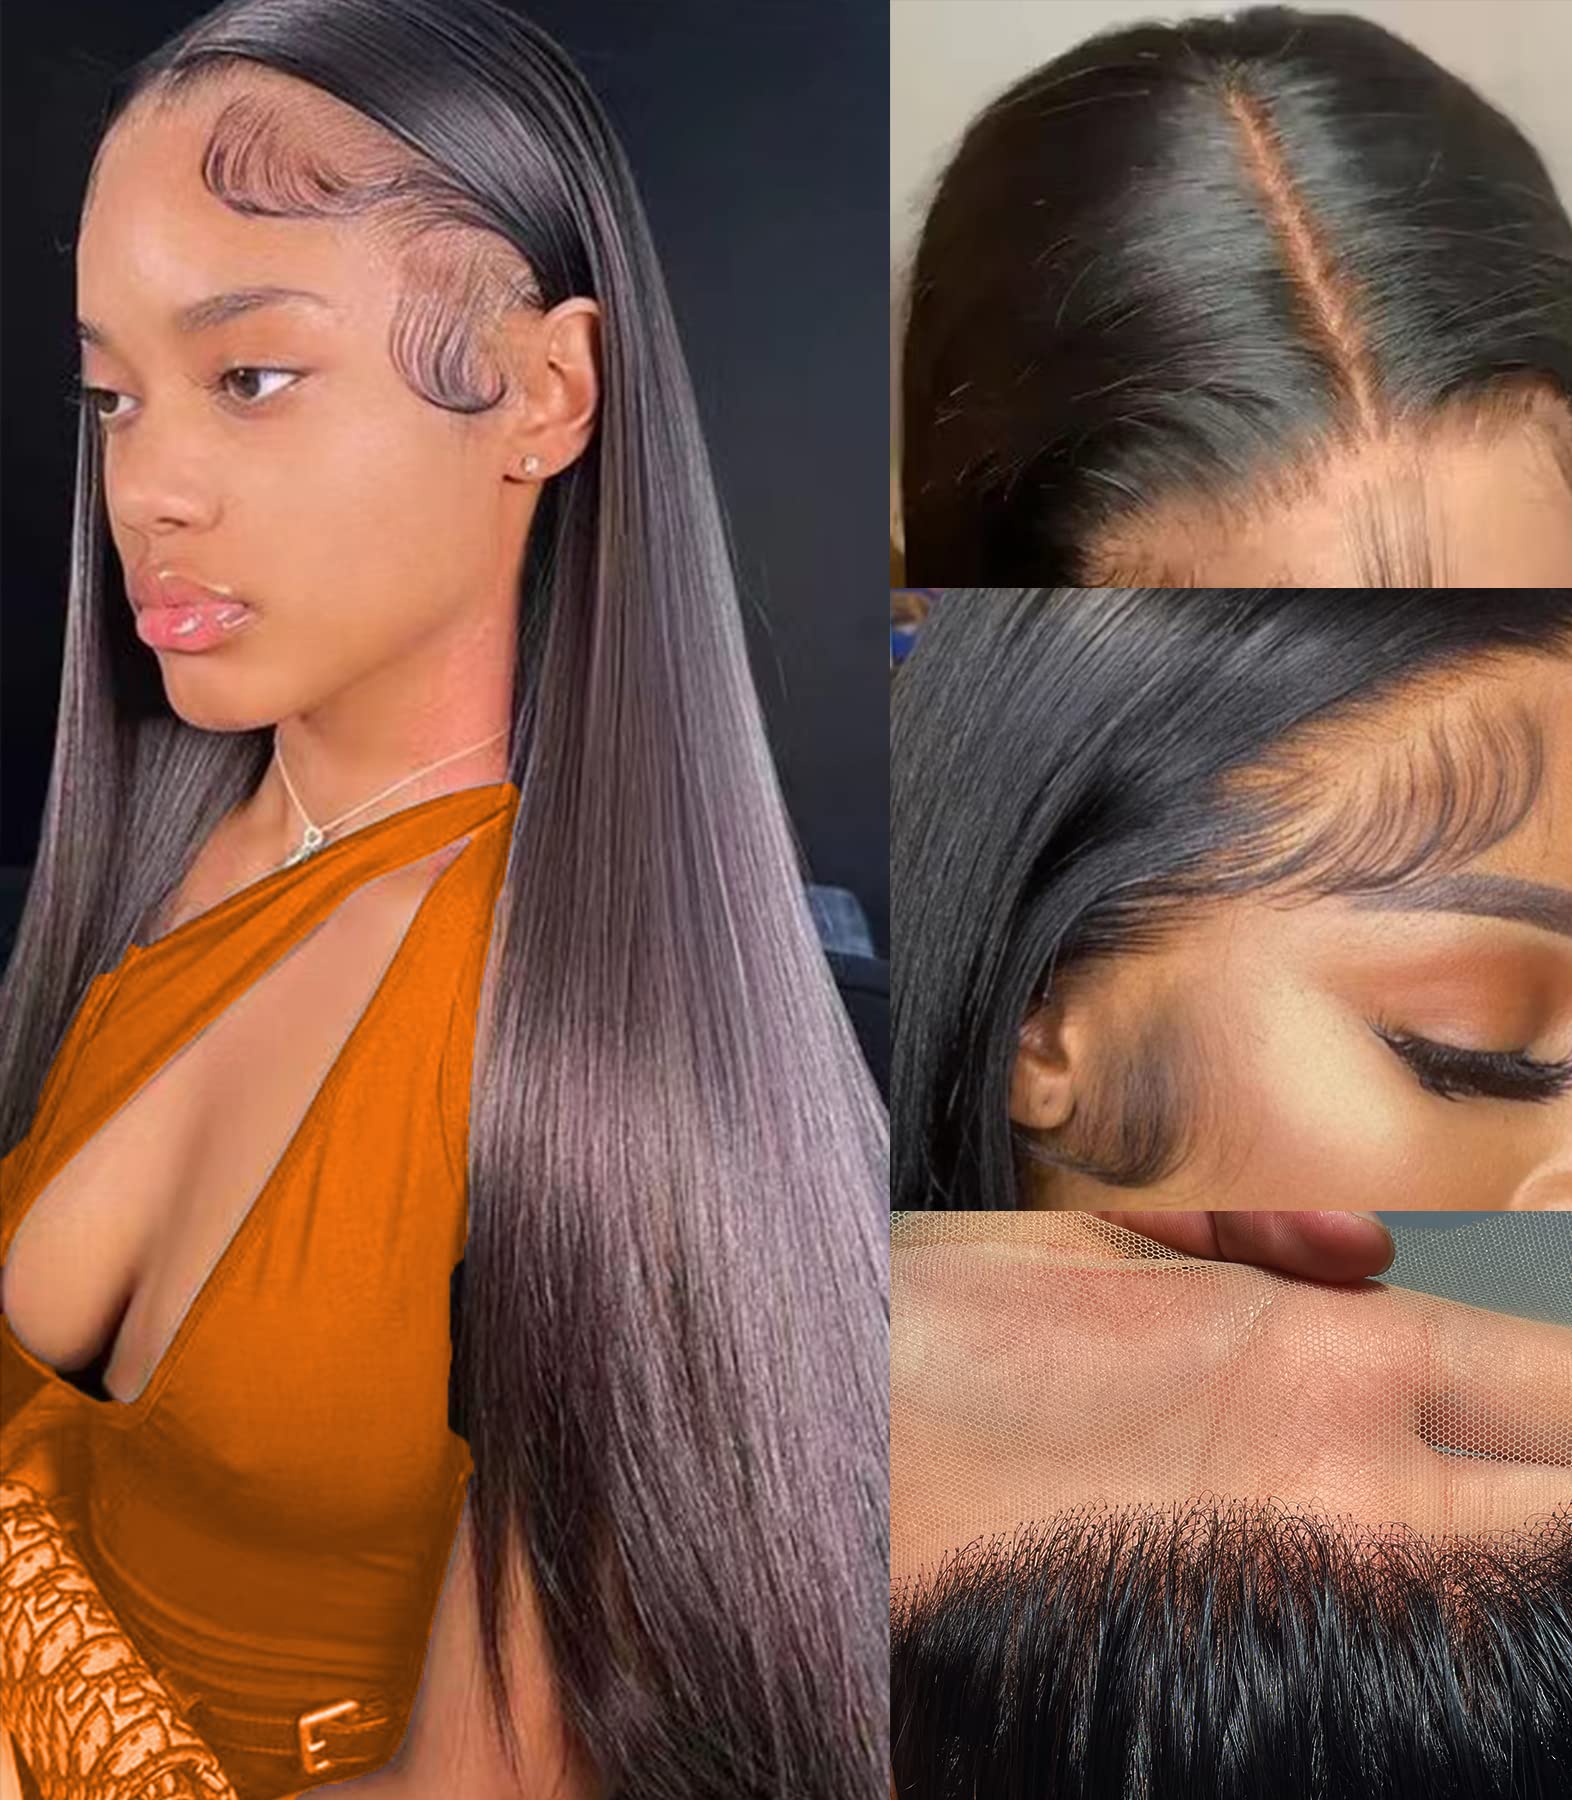 How to Install a Wig - START TO FINISH Frontal Wig Install